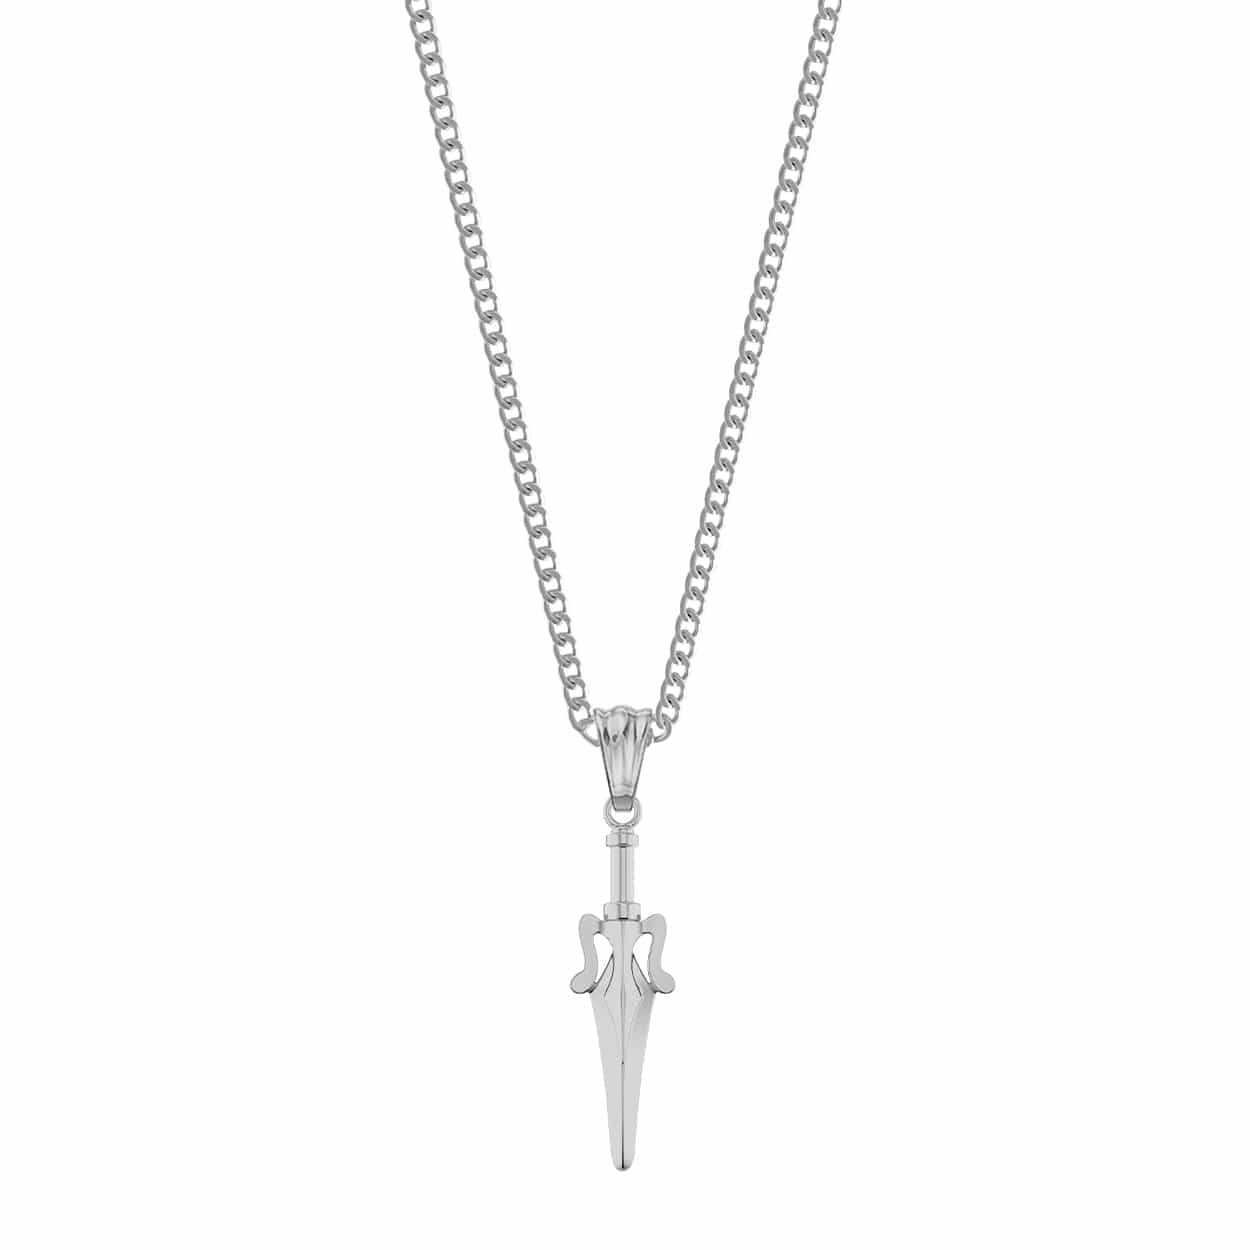 Mister Power Sword Necklace